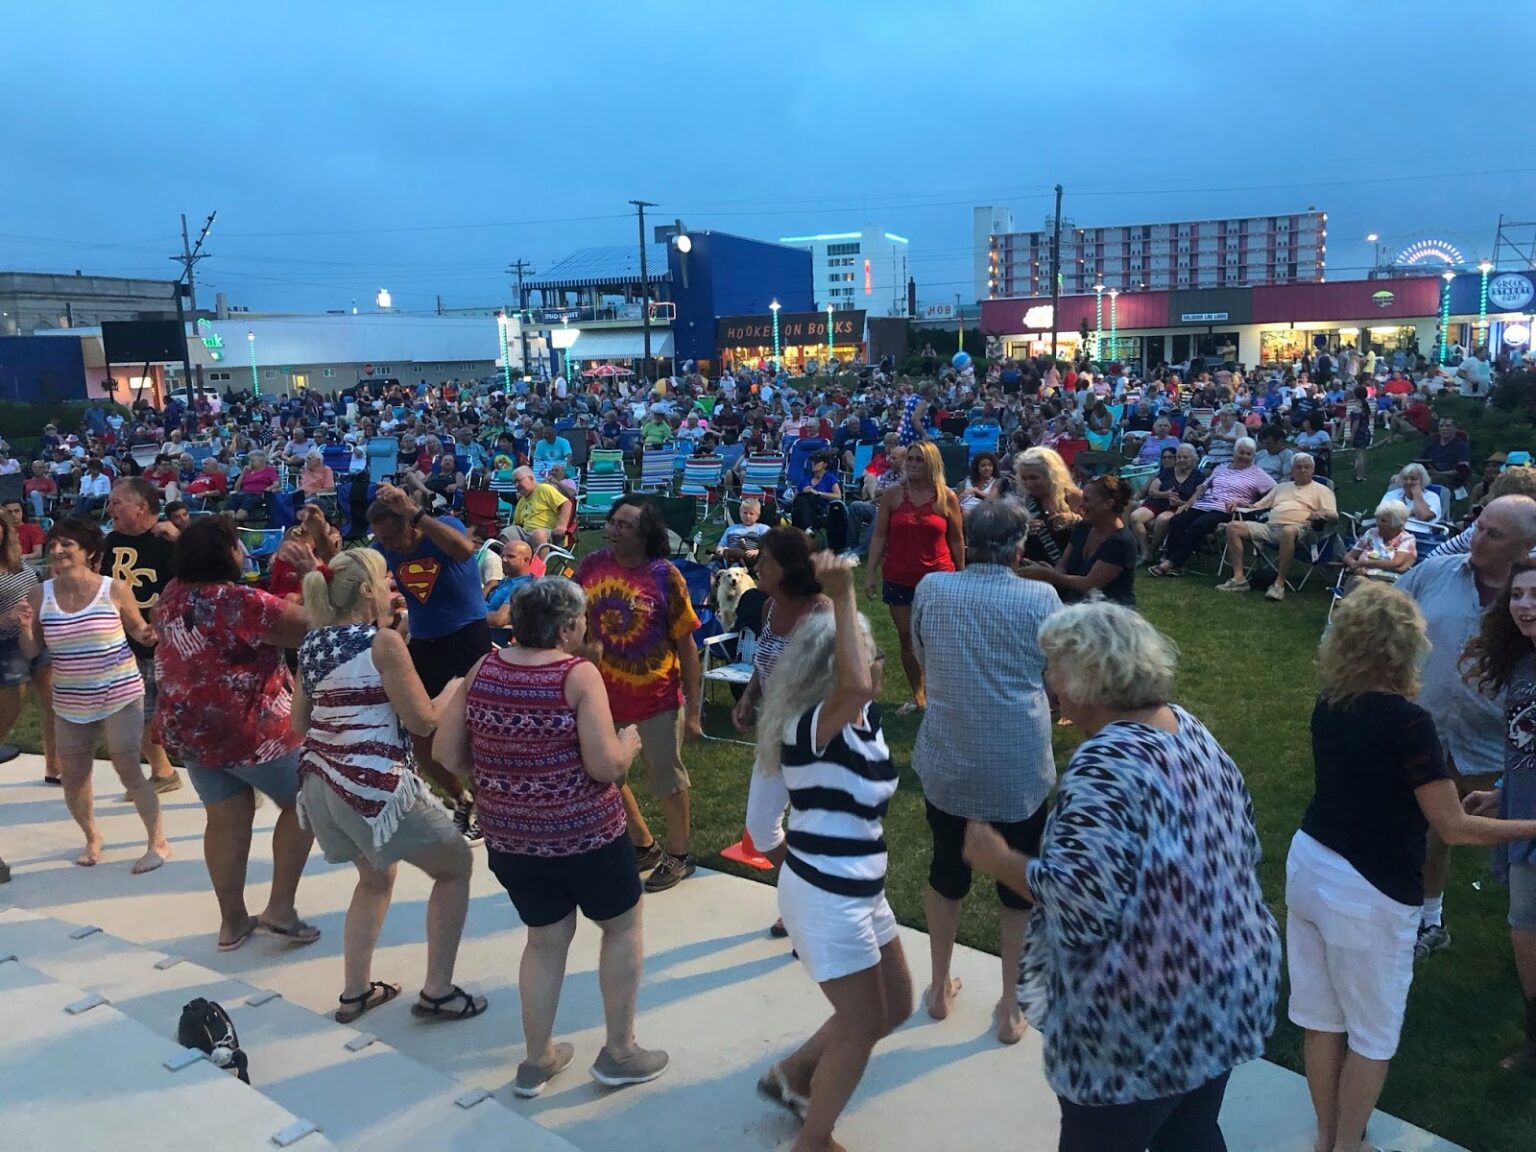 Downtown Wildwood’s Events and Attractions Expected to Draw Visitors